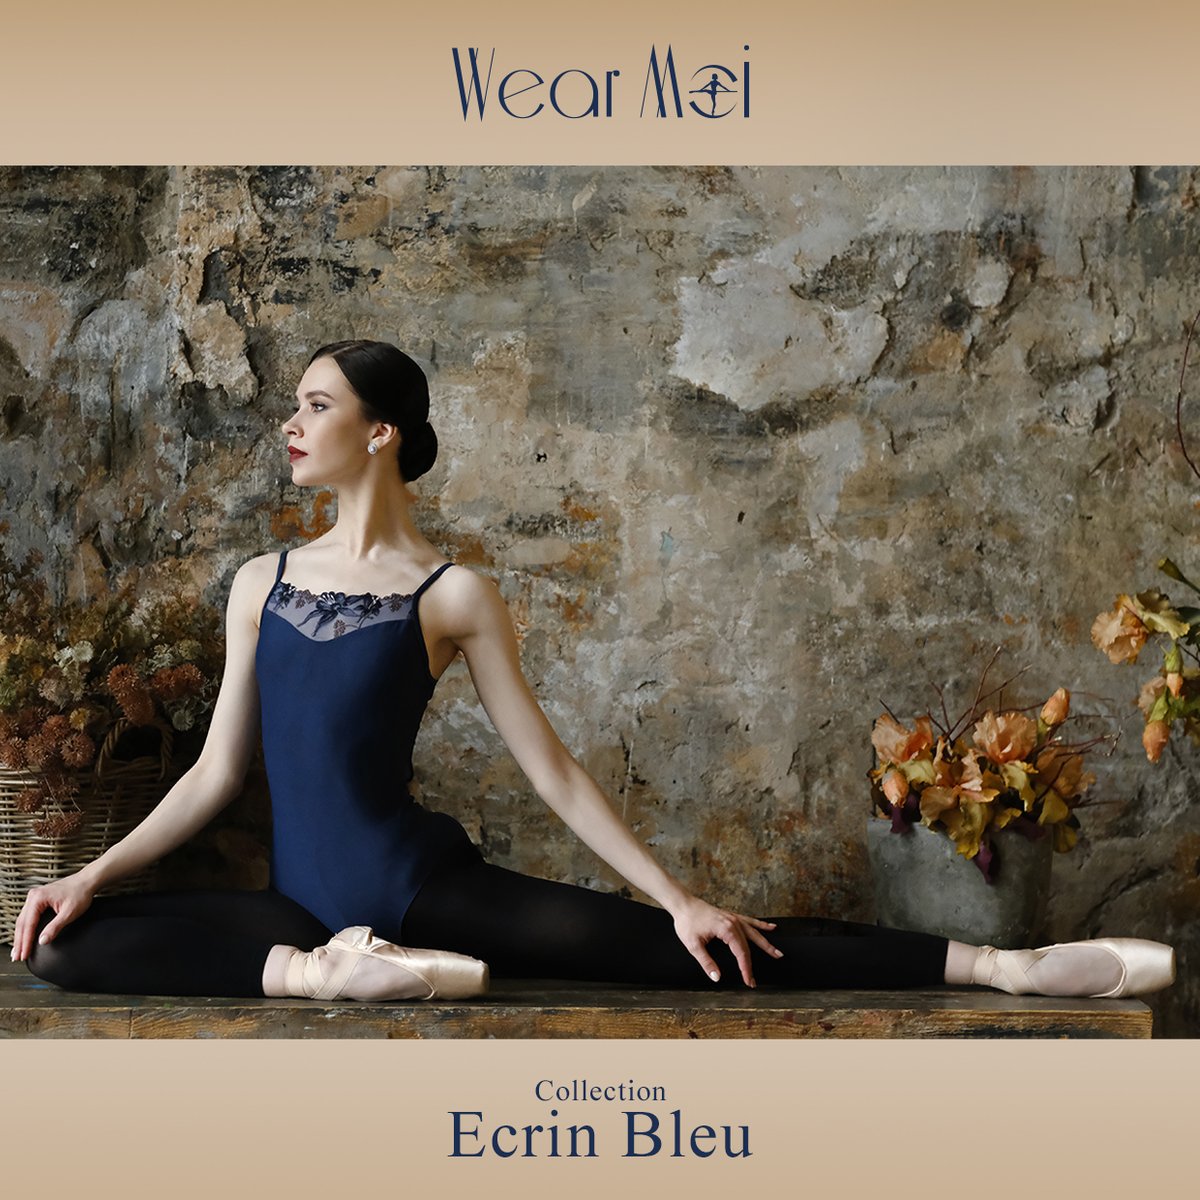 Our Ecrin Bleu collection flirts with lingerie themes and is the very definition of grace!

JASMIN: This camisole leotard has two embroidered tulle panels decorated with sea flowers. 
.
.
@WearMoi #wearmoi #wearmoidancewear #dancewear #ballet